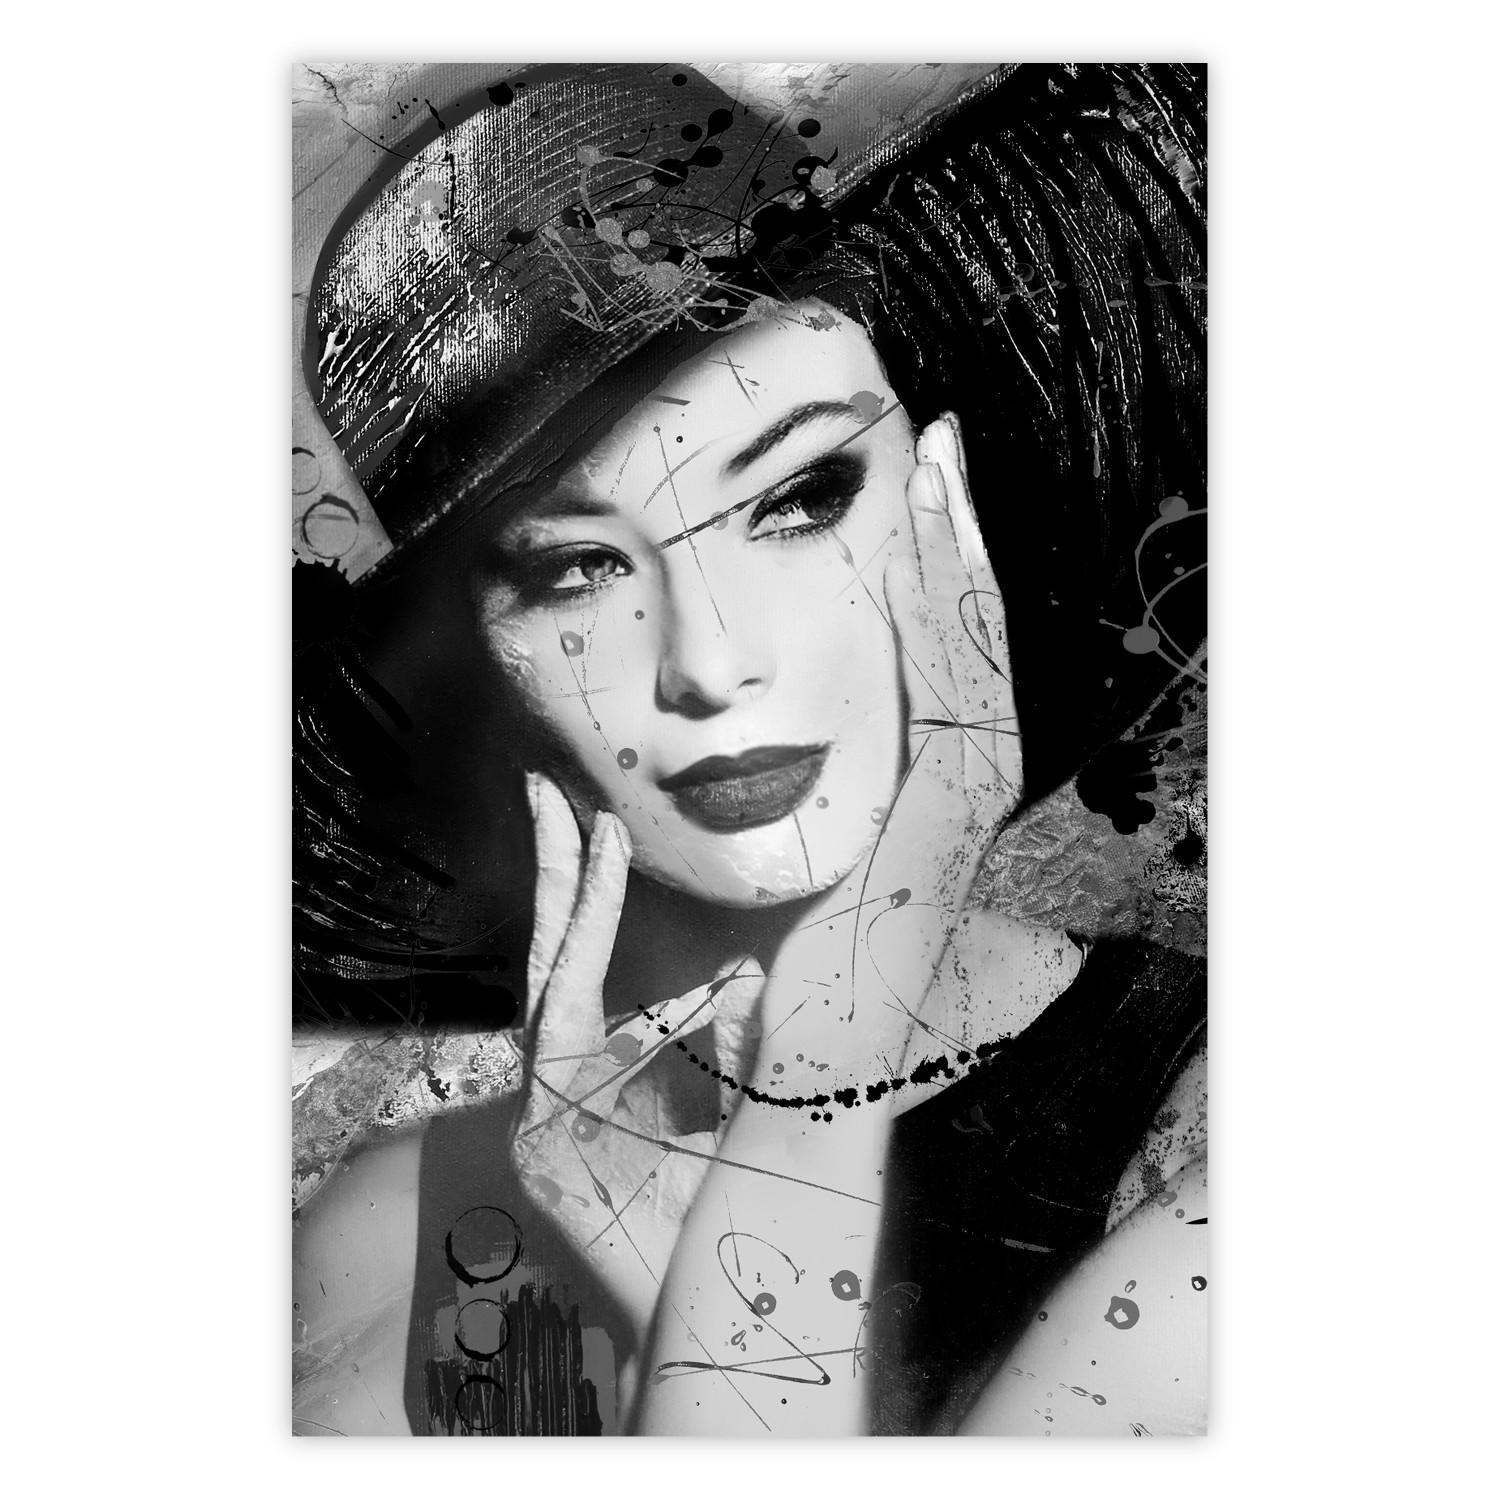 Poster Diva - black and white portrait of woman with expressive lips and eyes